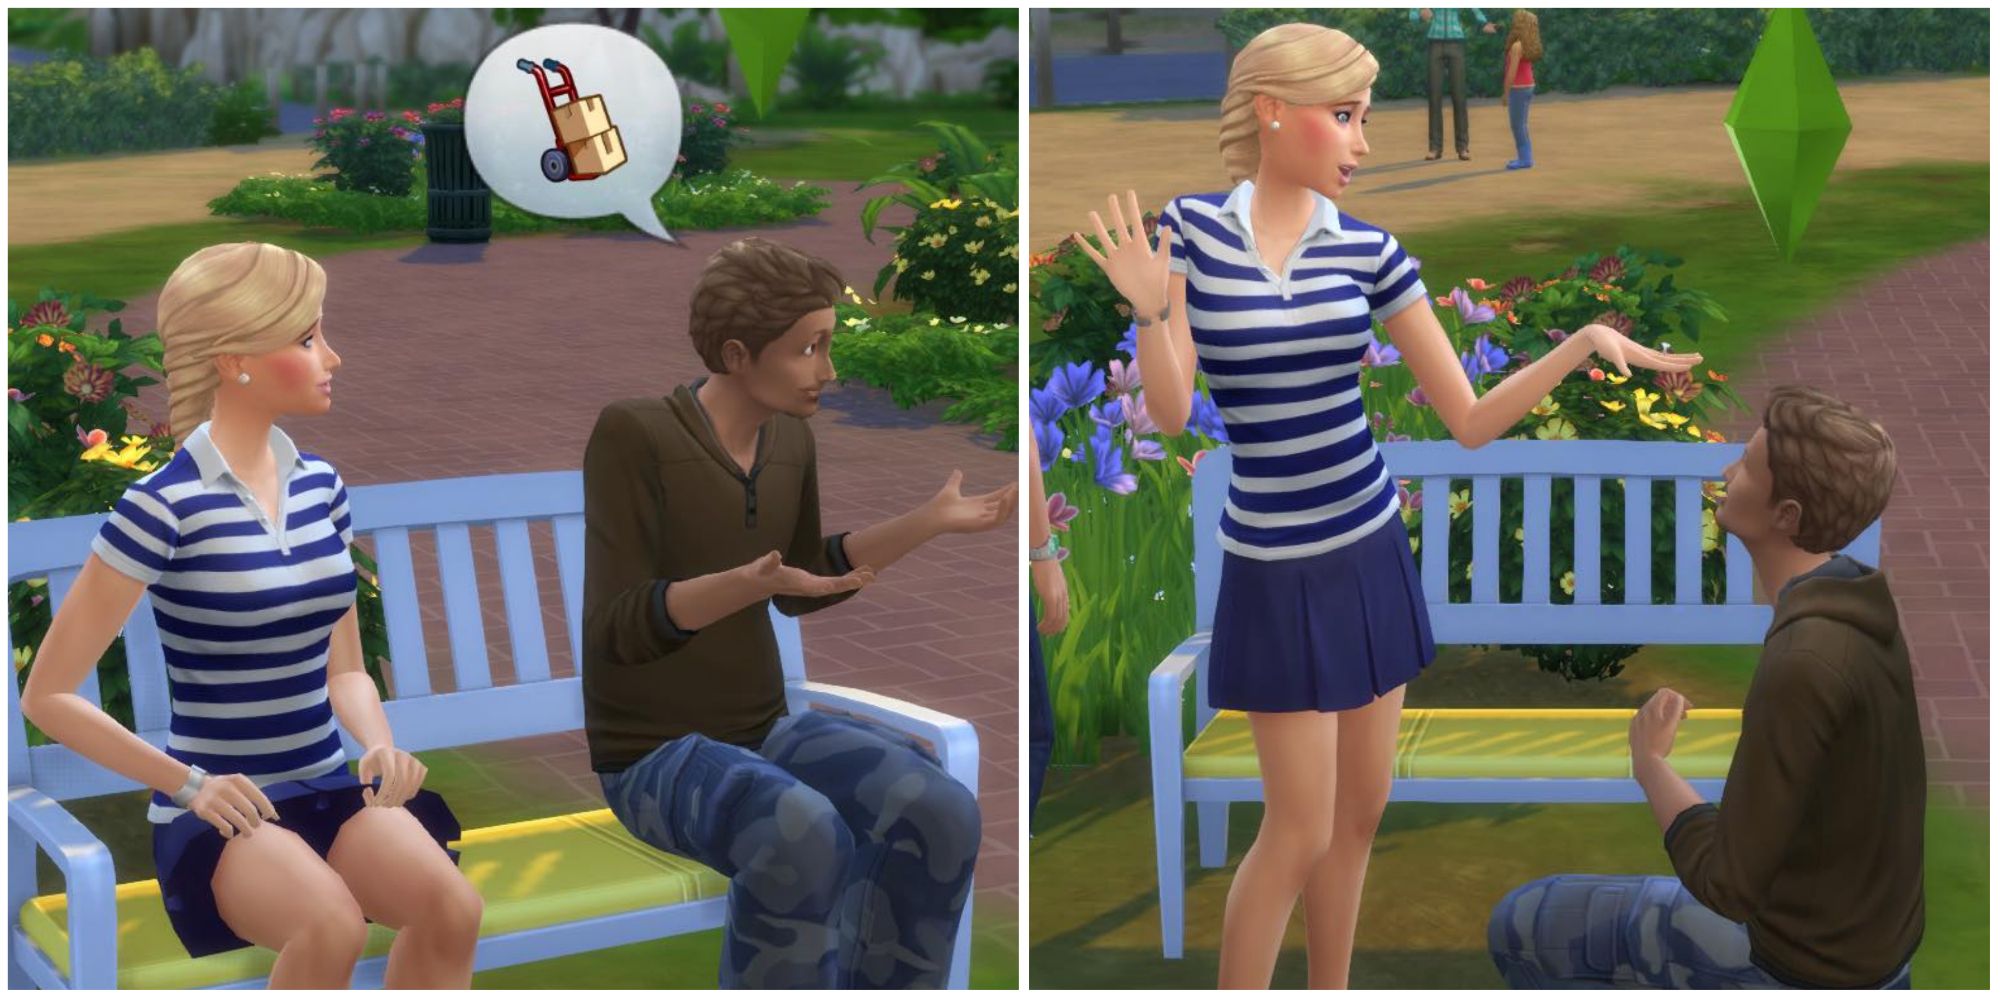 The Sims 4: How To Add A Sim To A Household